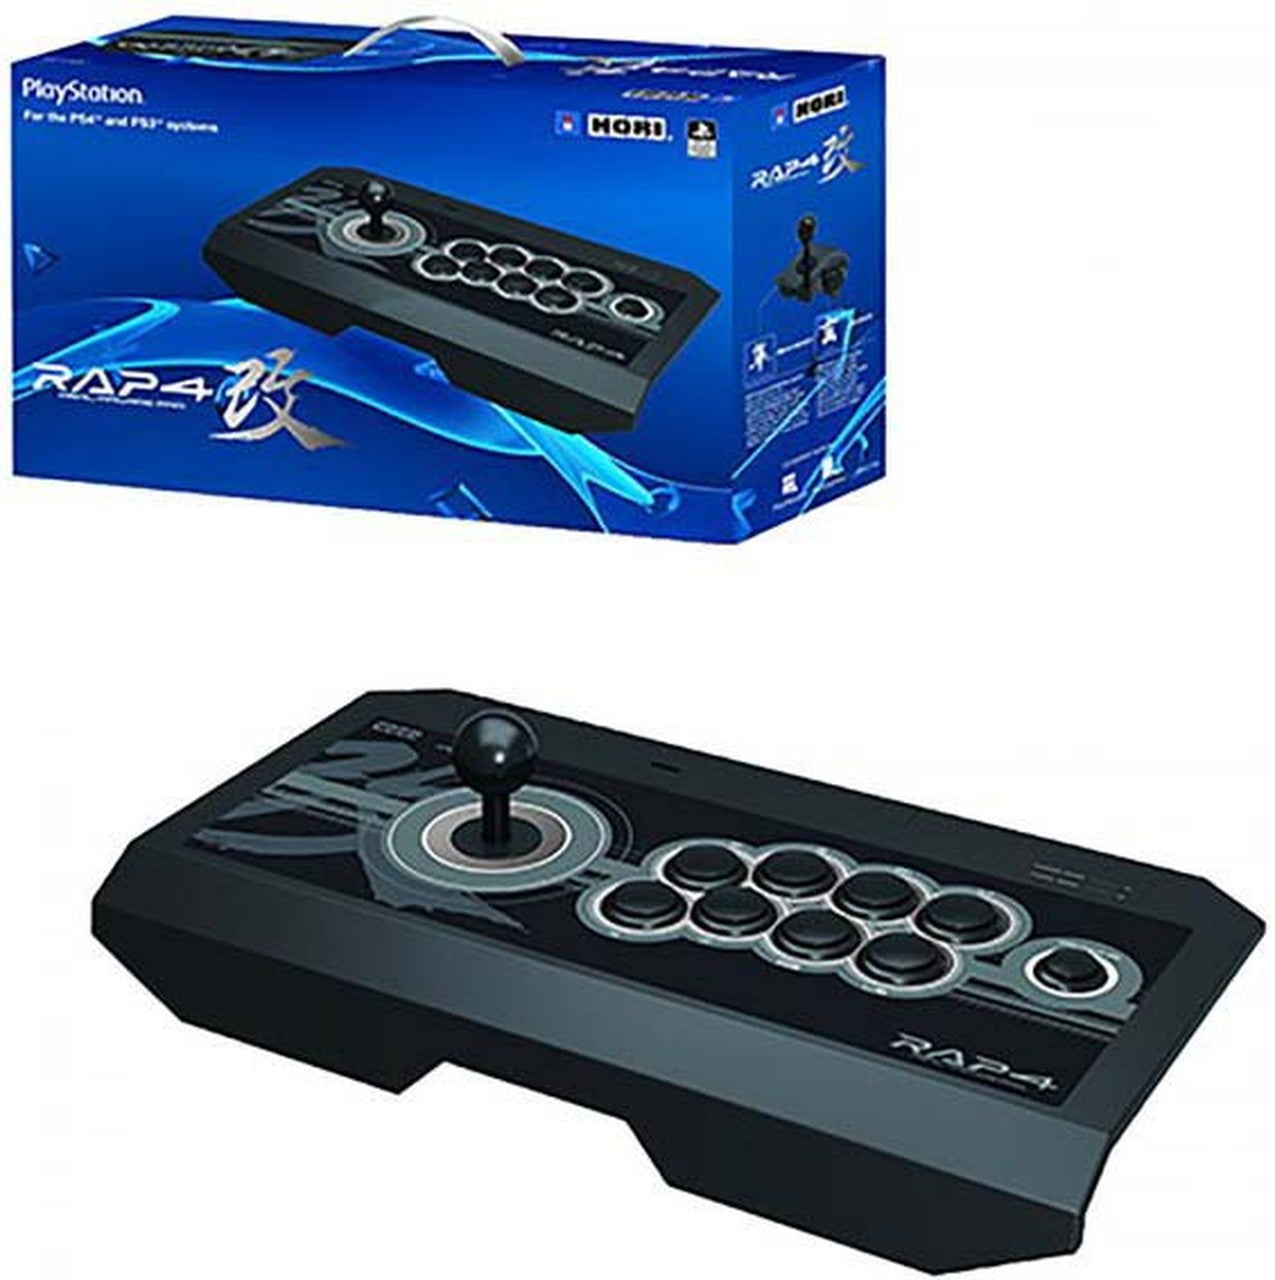 HORI REAL ARCADE PRO 4 KAI PS3/PS4 ARCADE STICK - BLACK (PICK UP ONLY)